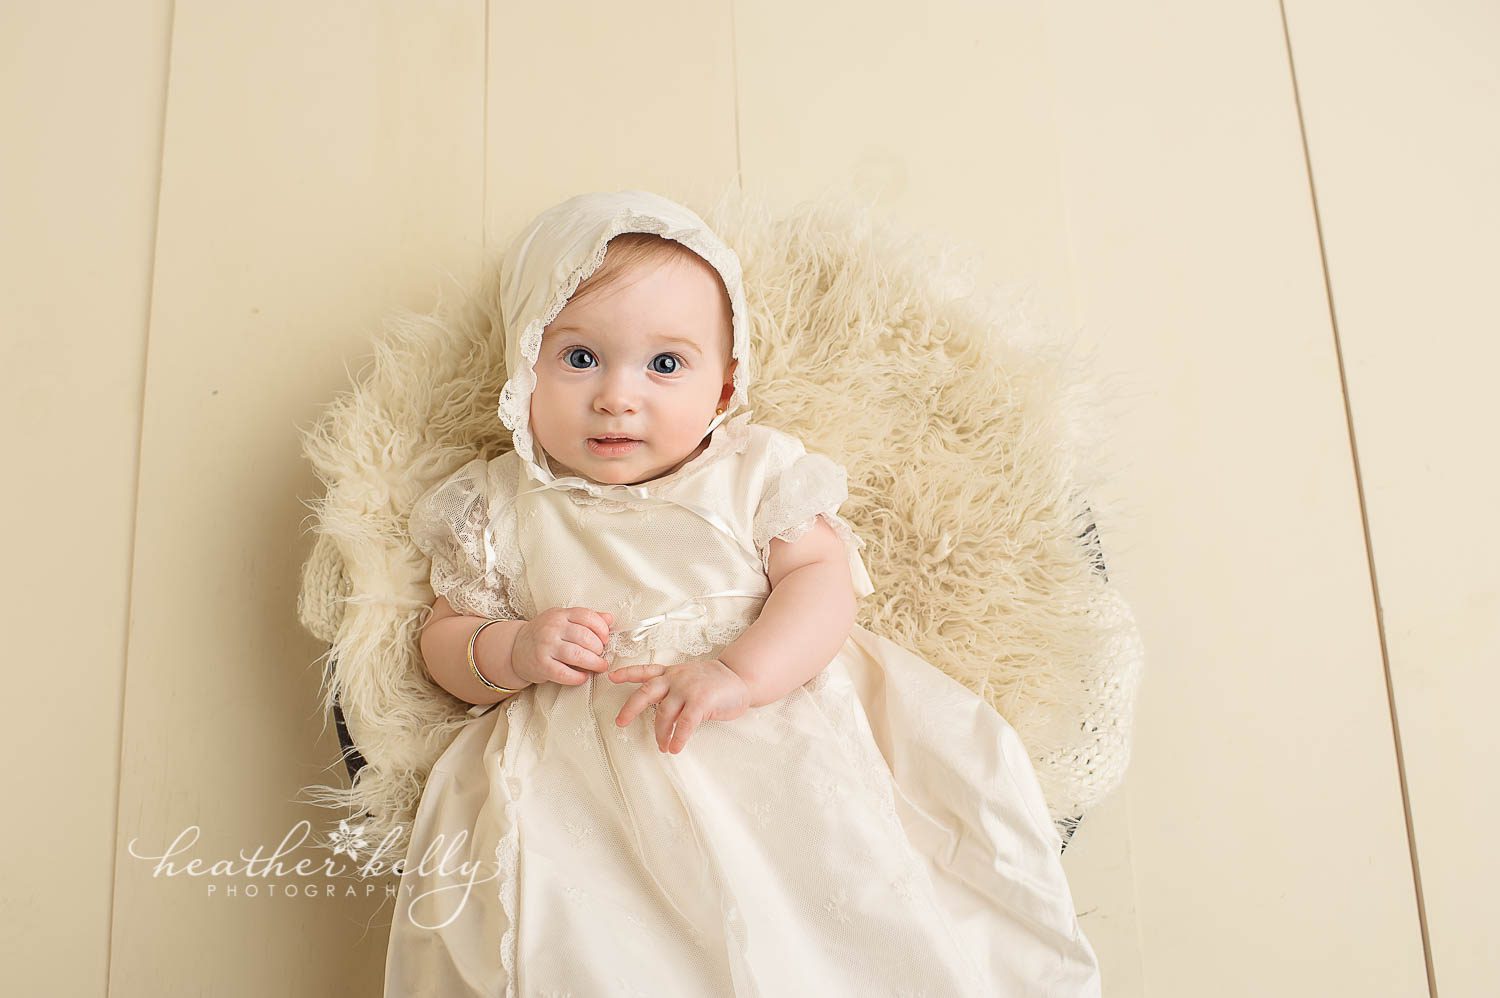 baby girl in white baptism gown photo. Baptism portrait photography by ct baby photographer heather kelly photography